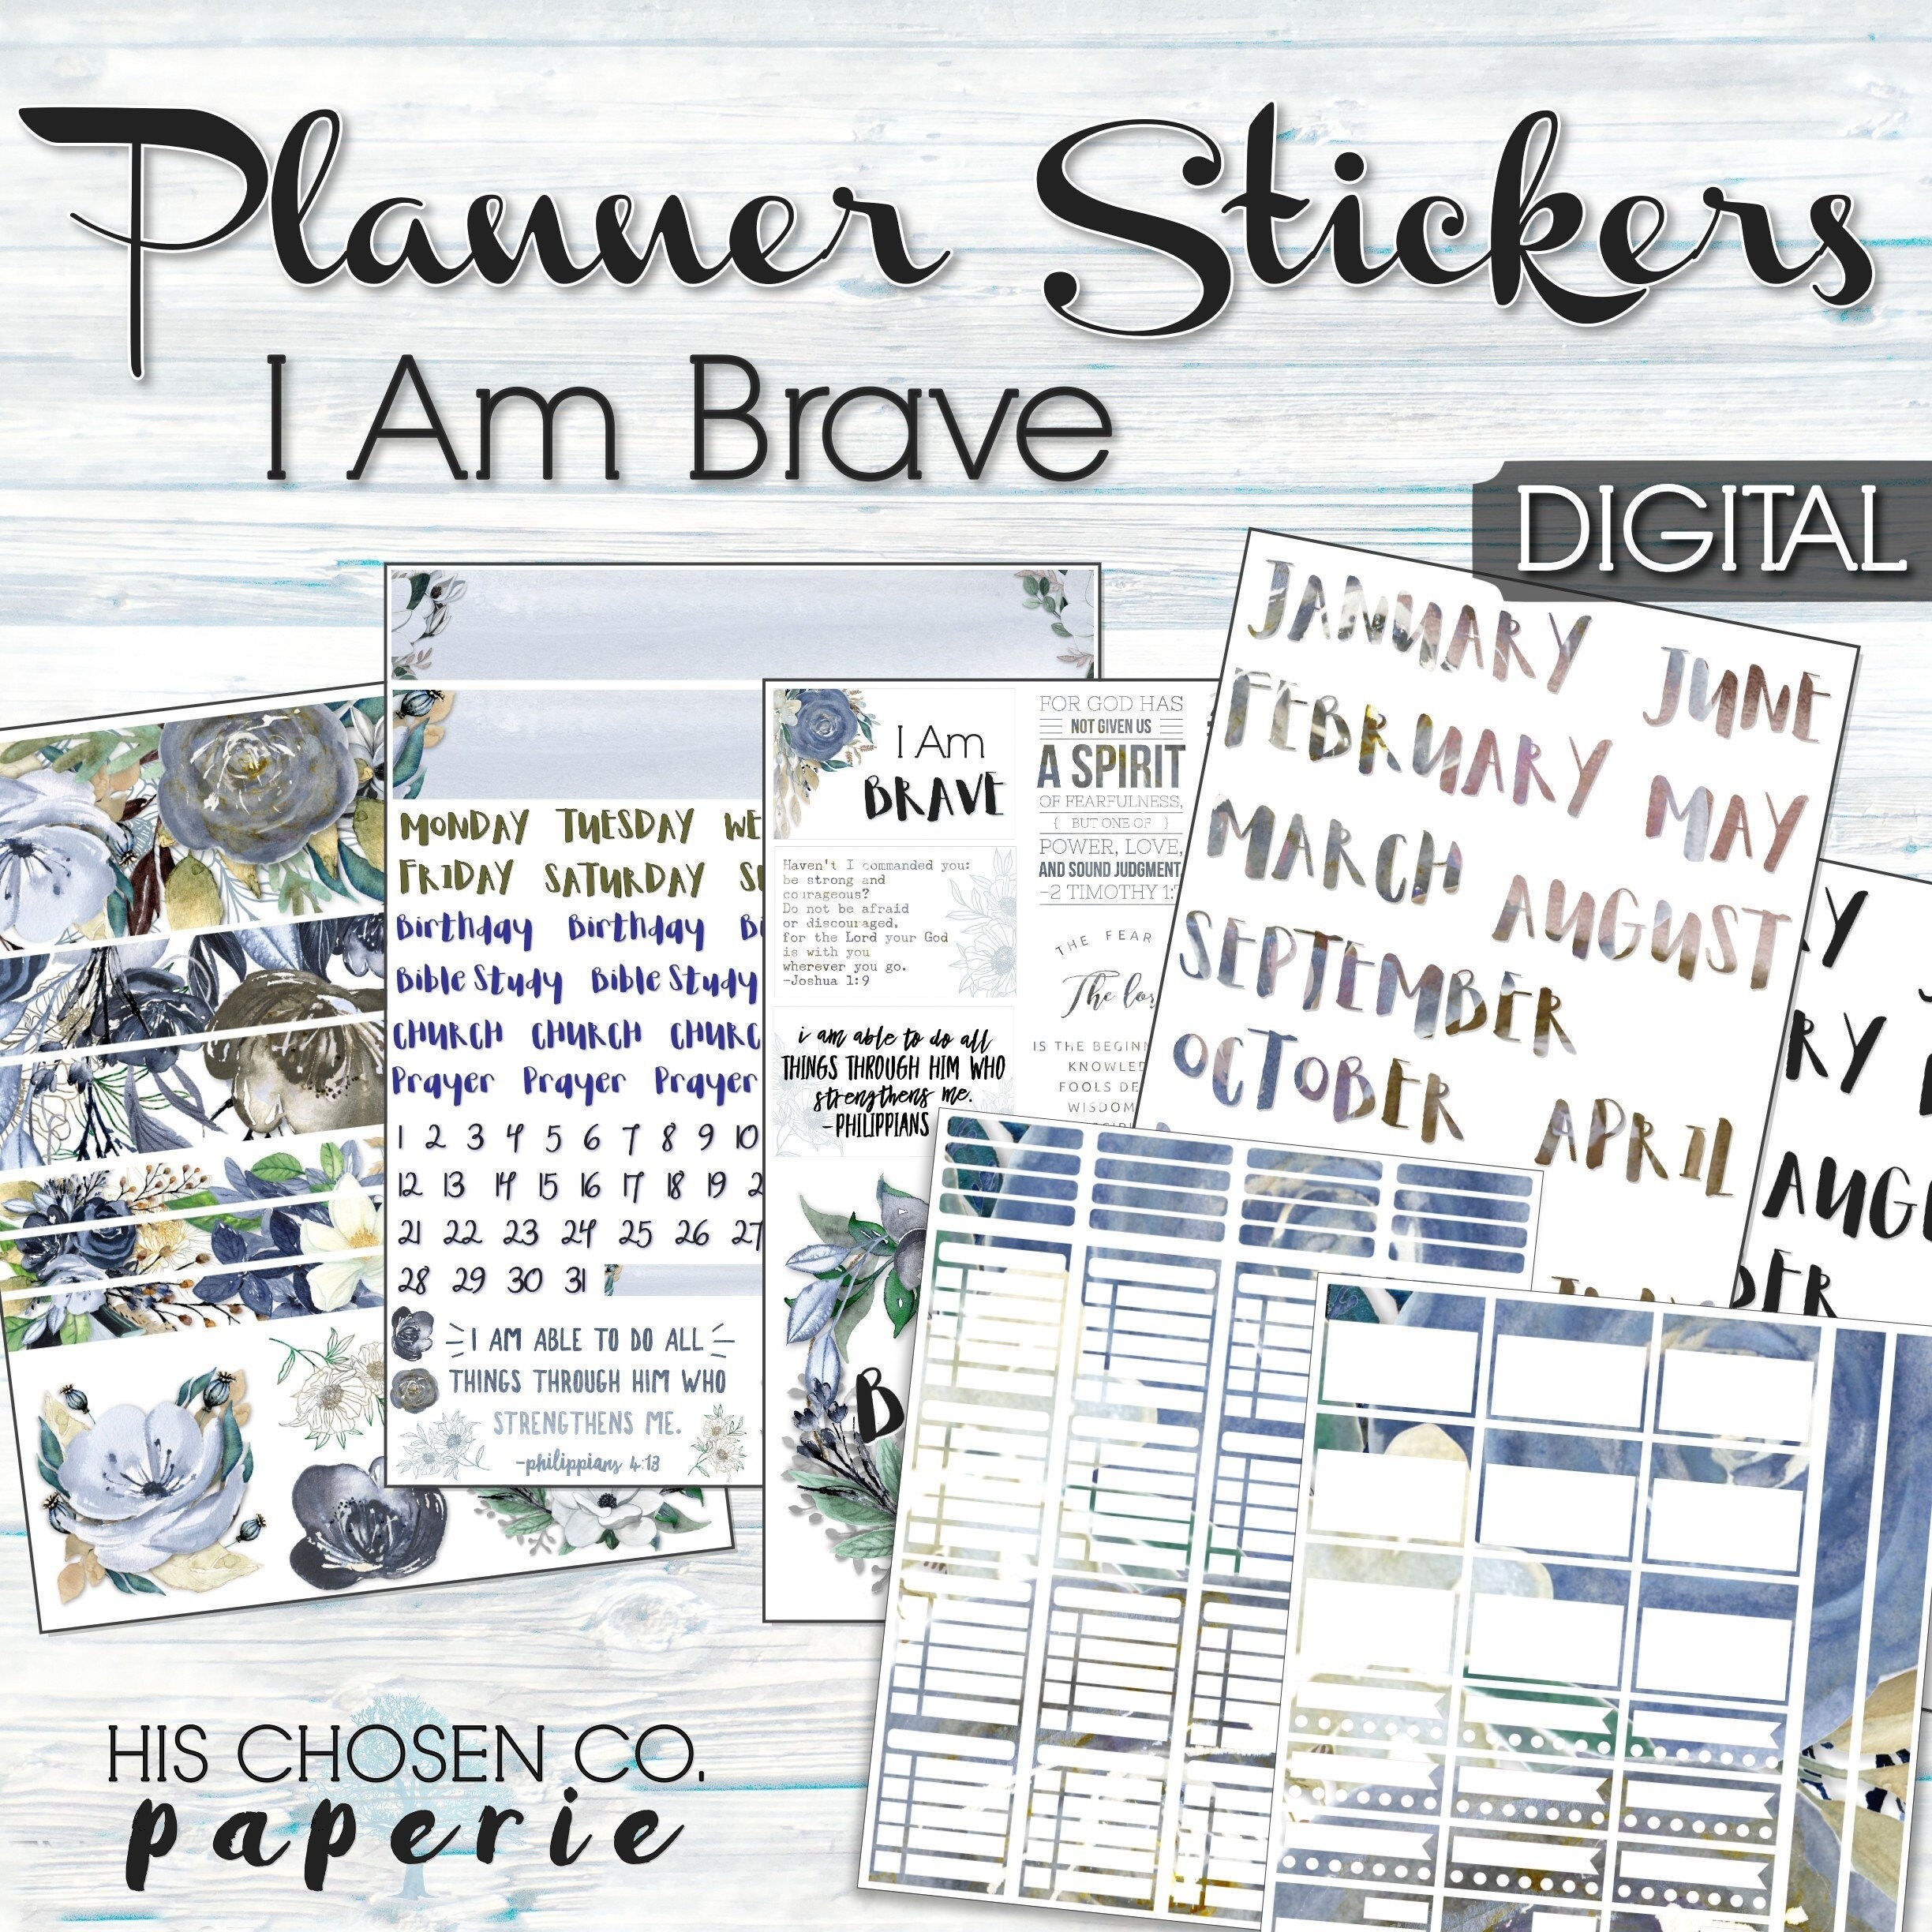 60+ Free Printable Functional Stickers for your Planner or Bullet Journal -  Lovely Planner